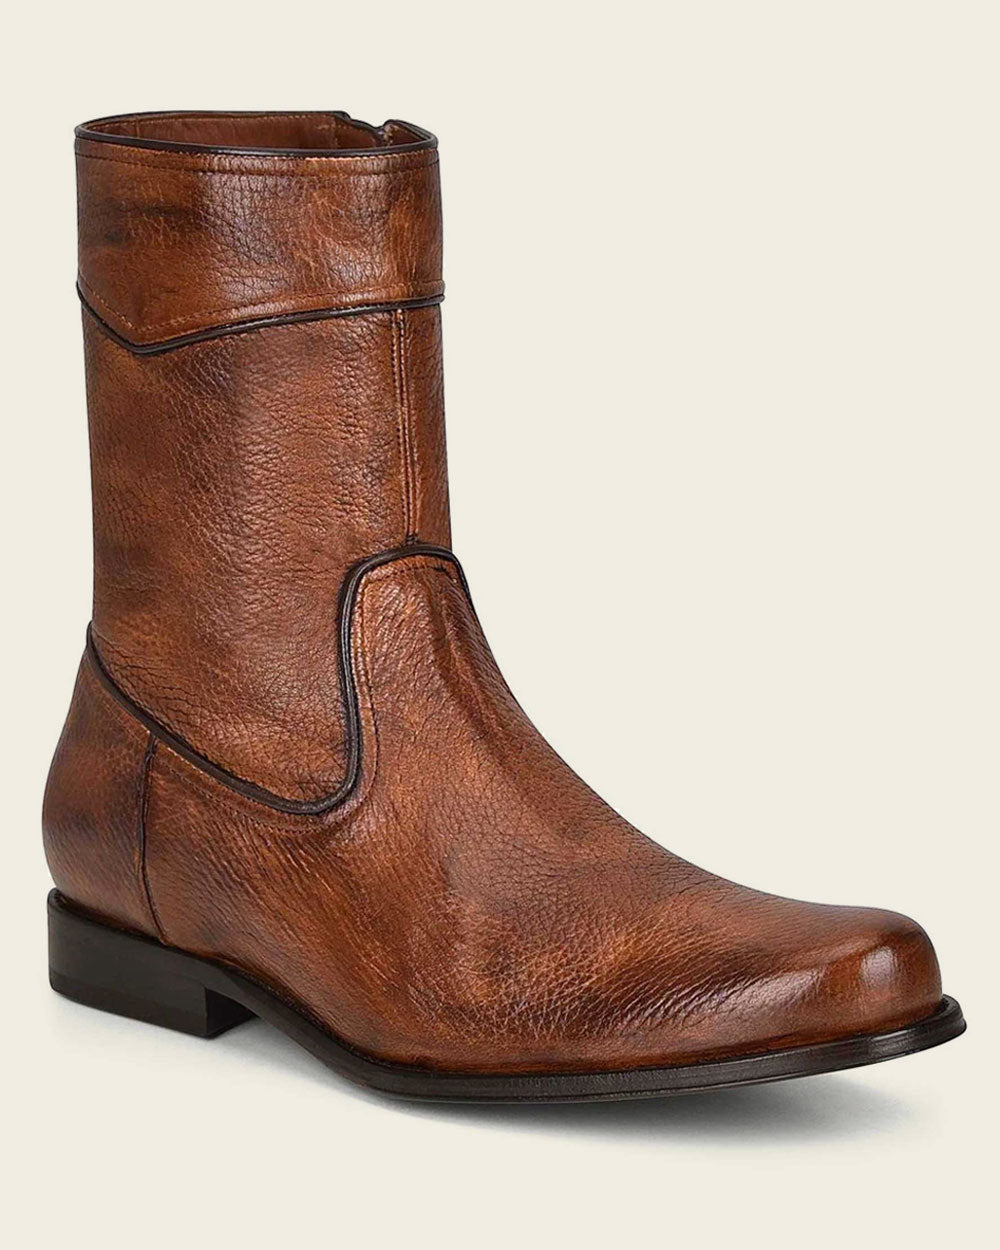 Crafted from genuine deer leather, this men's boots show the perfect blend of luxury and style. A must-have addition to your collection.